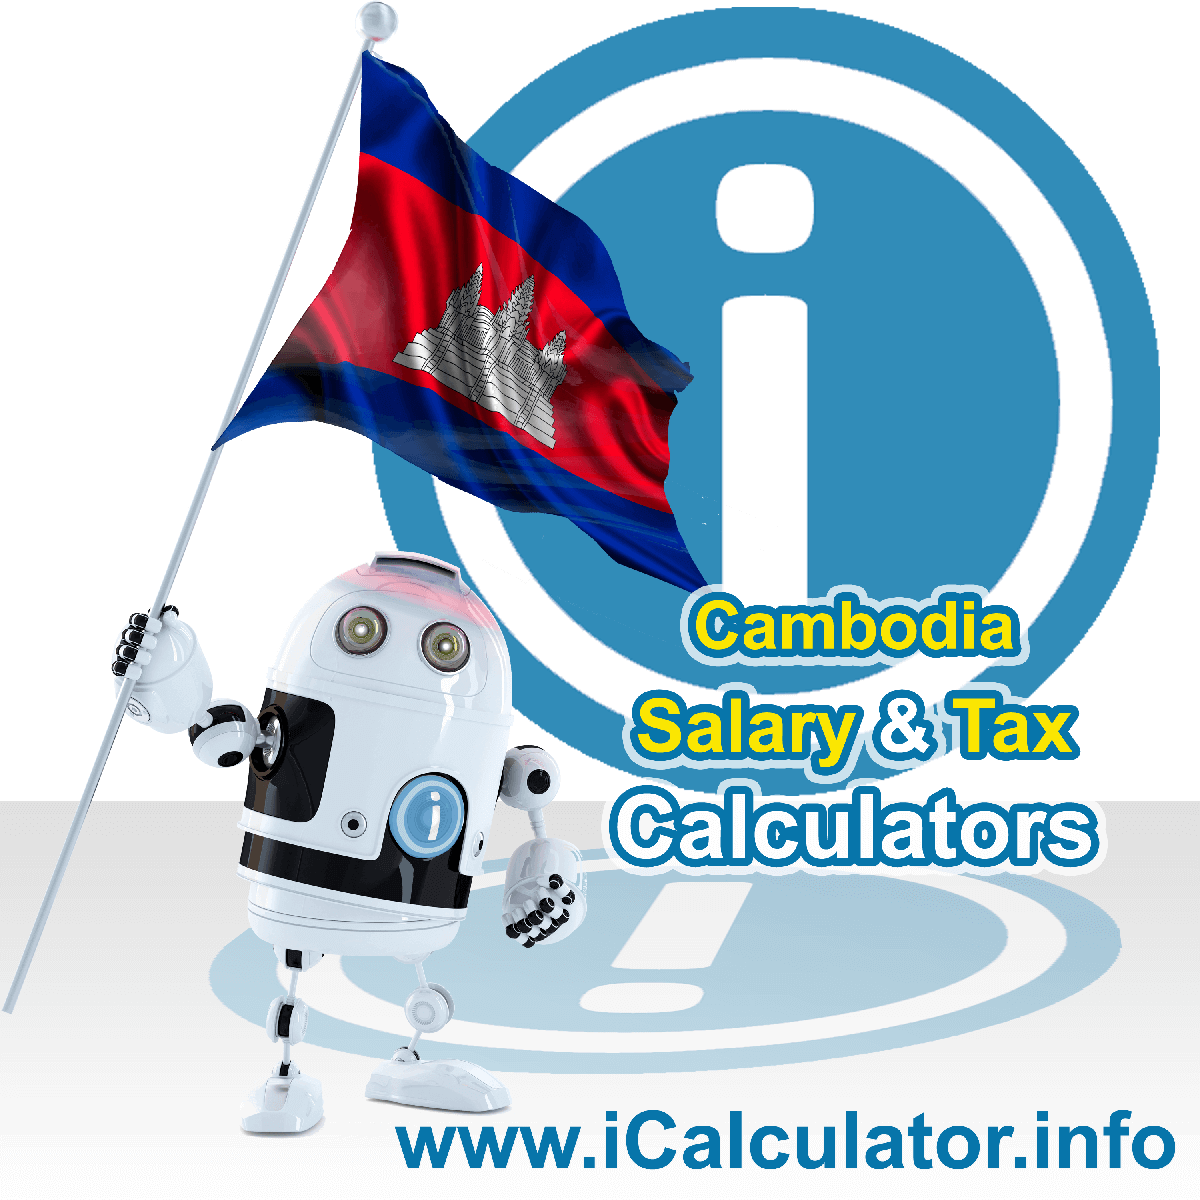 Cambodia Tax Calculator. This image shows the Cambodia flag and information relating to the tax formula for the Cambodia Salary Calculator